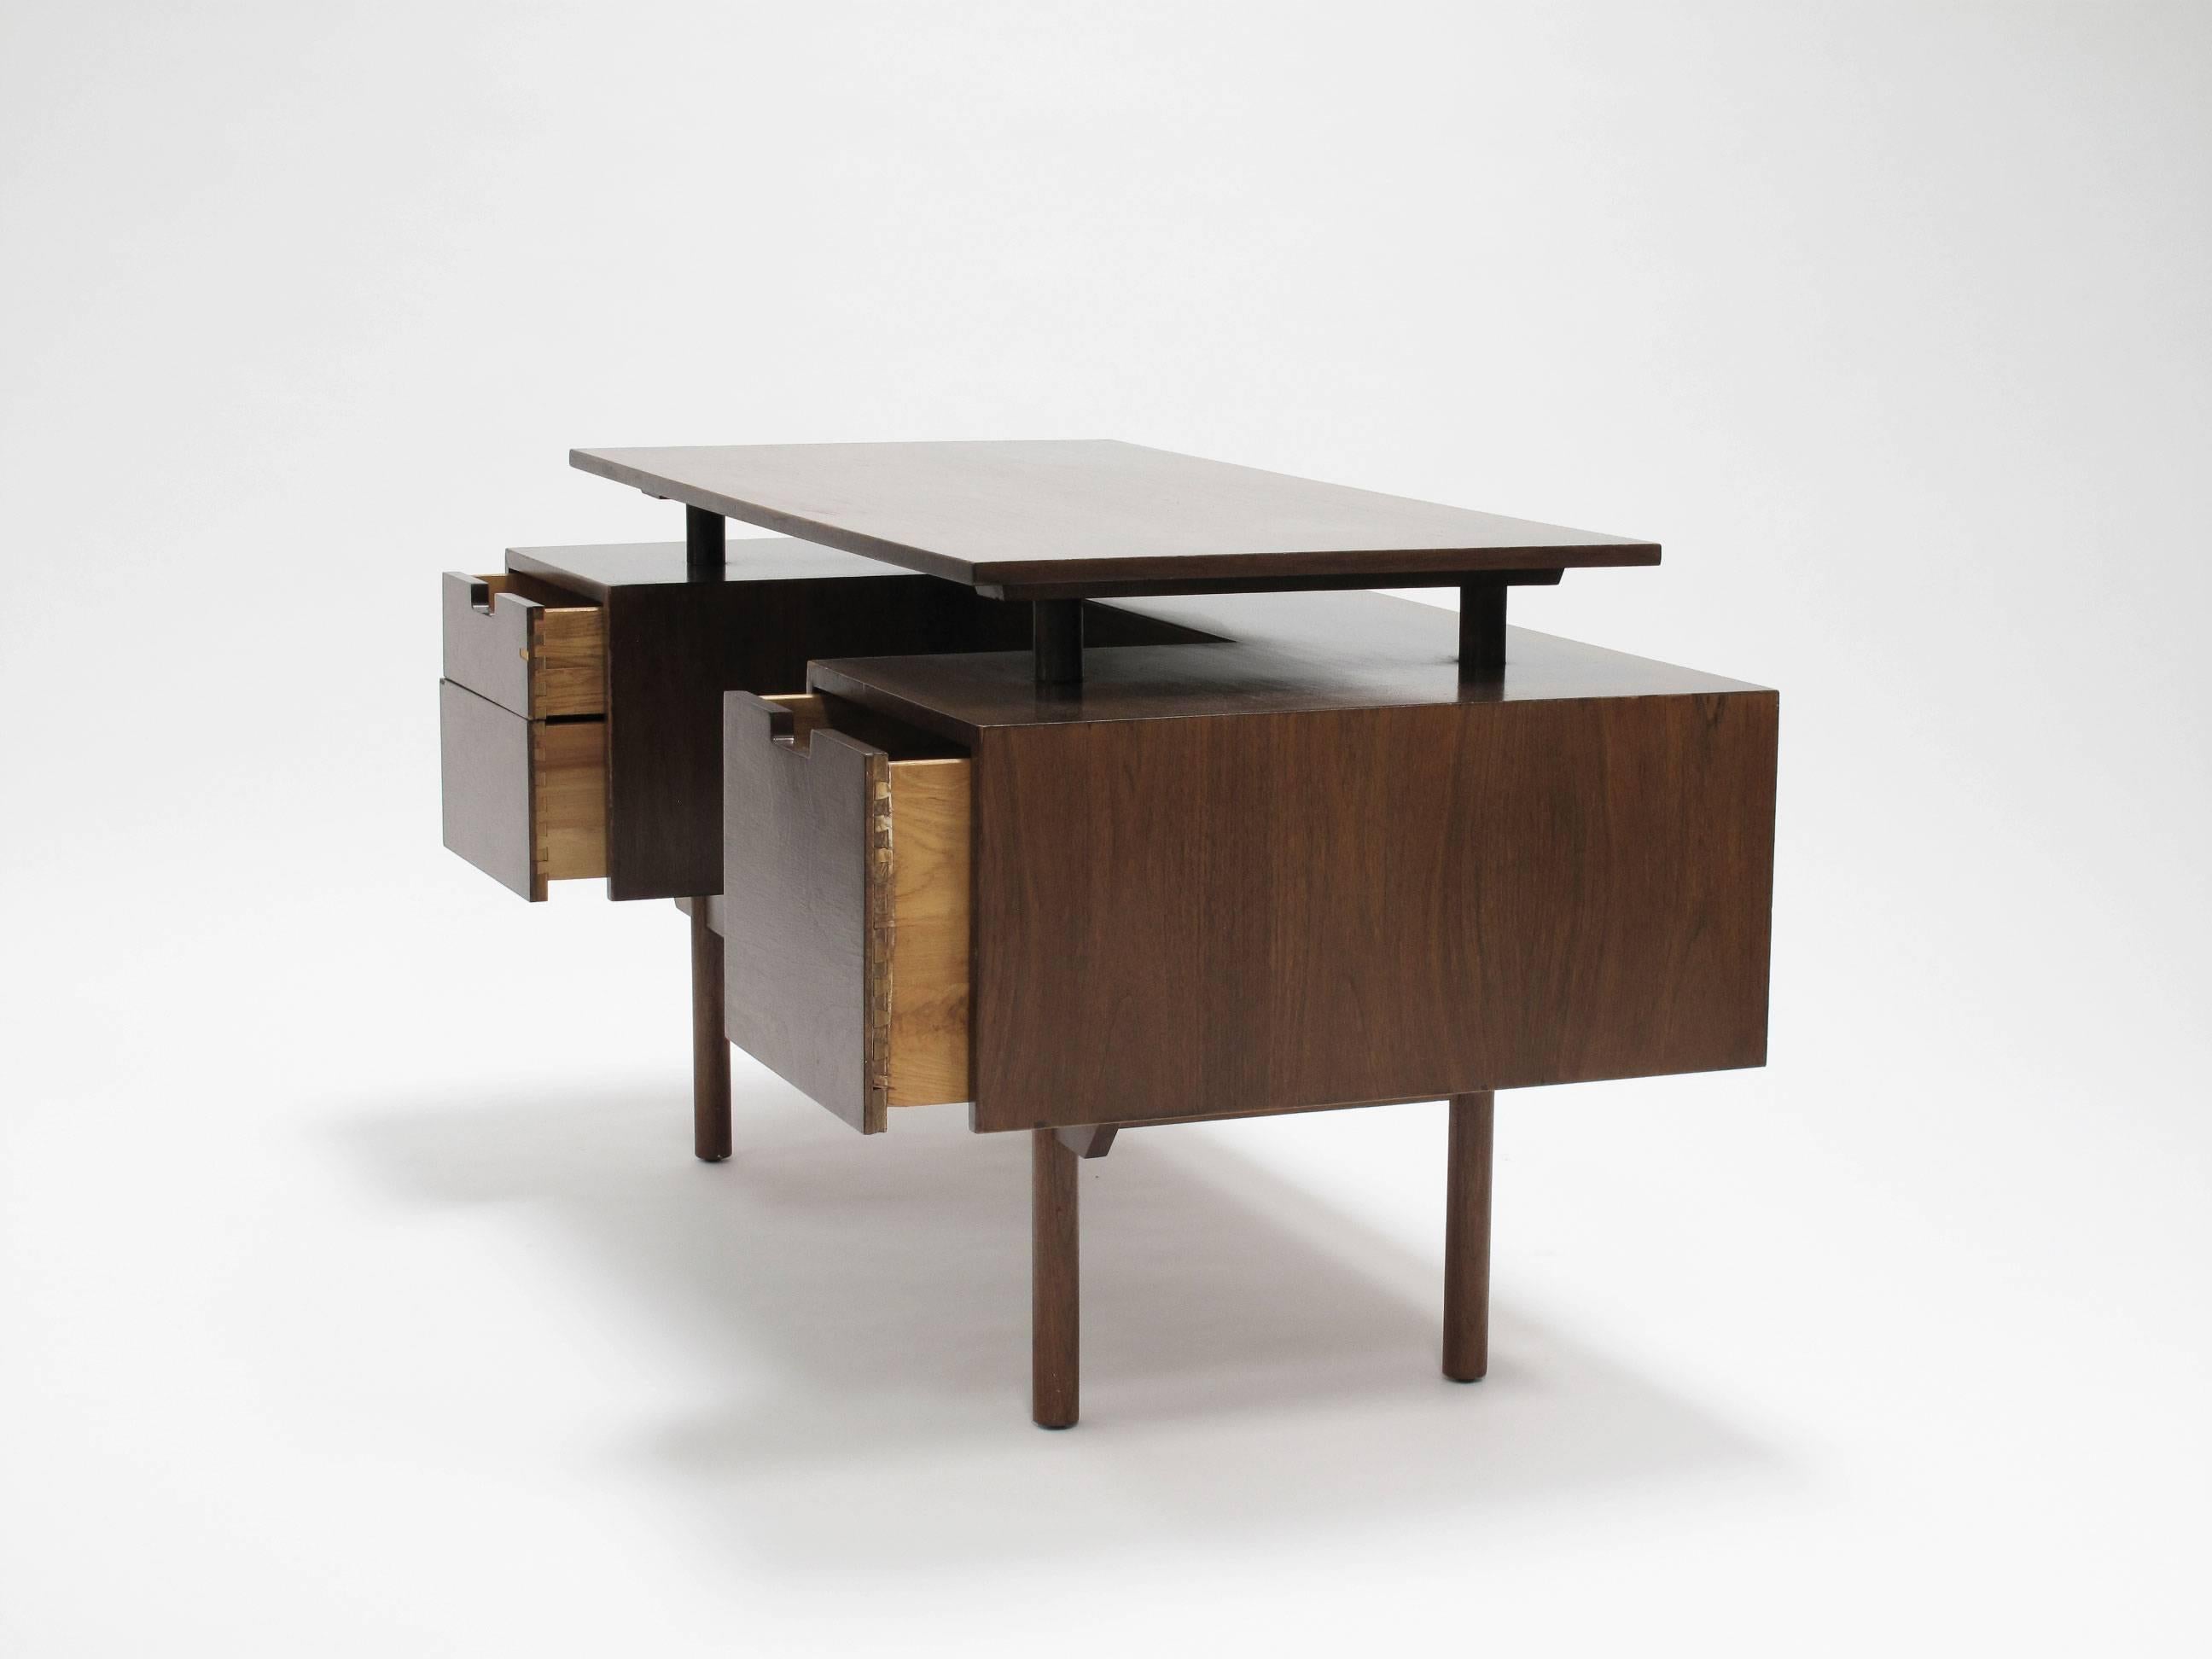 Quintessential California Modern executive desk in walnut veneer with drawers and open front in an architectural case study style, designed by Milo Baughman and made by Glenn of California, 1950s. The floating top measures 24.5 deep by 48.75 wide